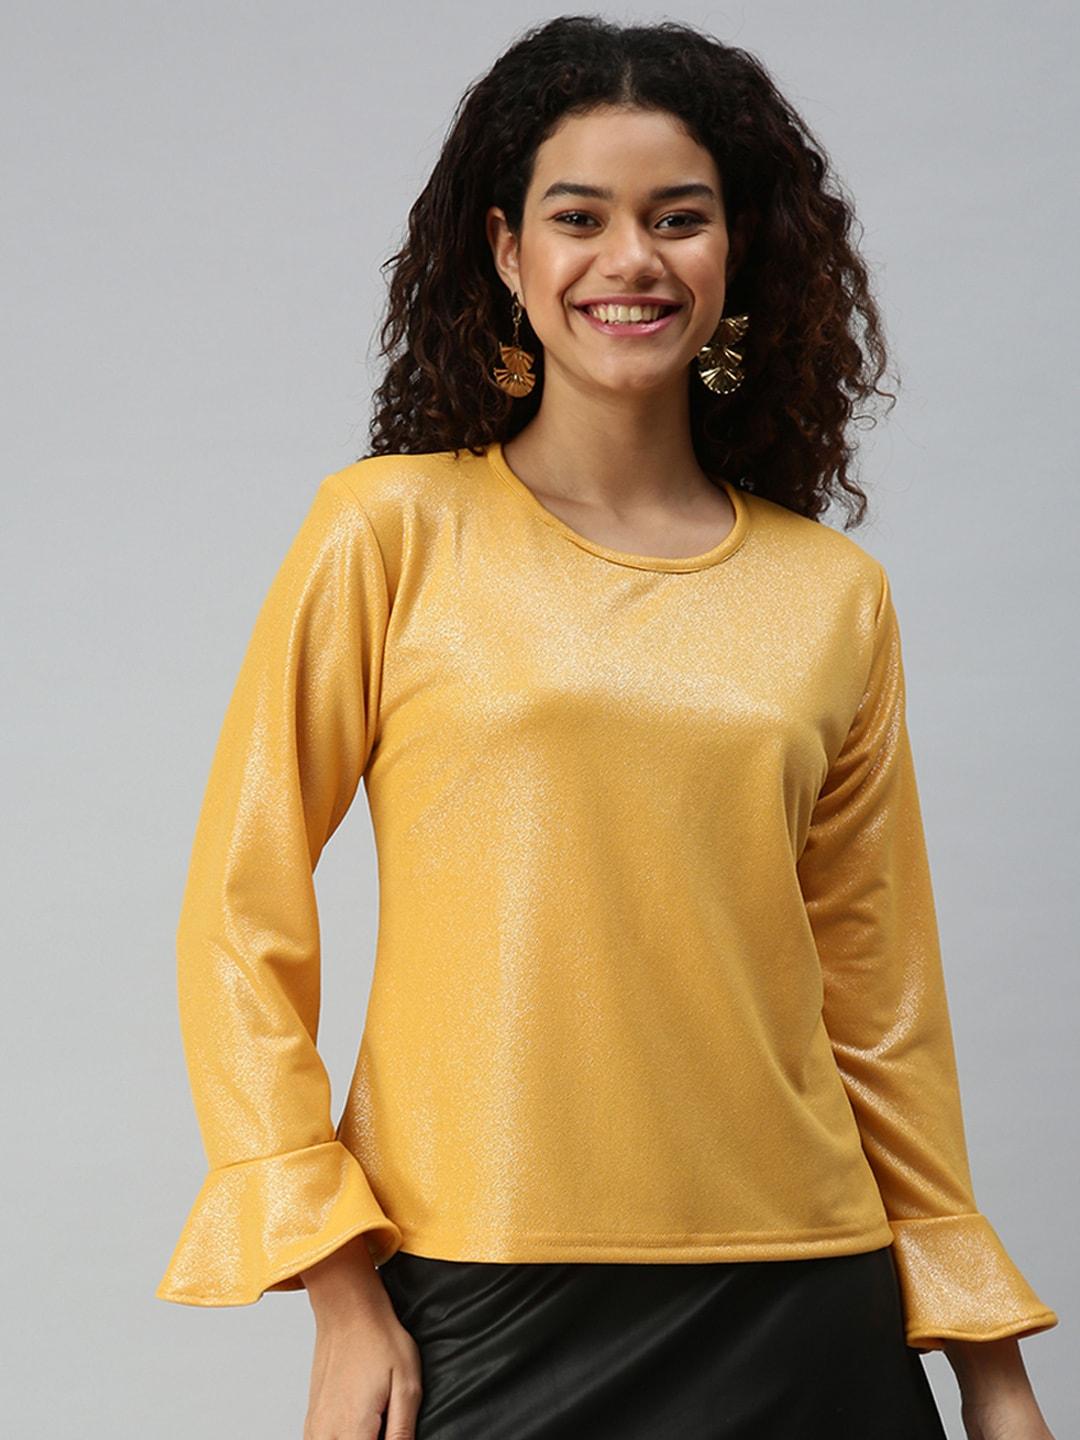 showoff-mustard-yellow-sheen-bell-sleeves-top